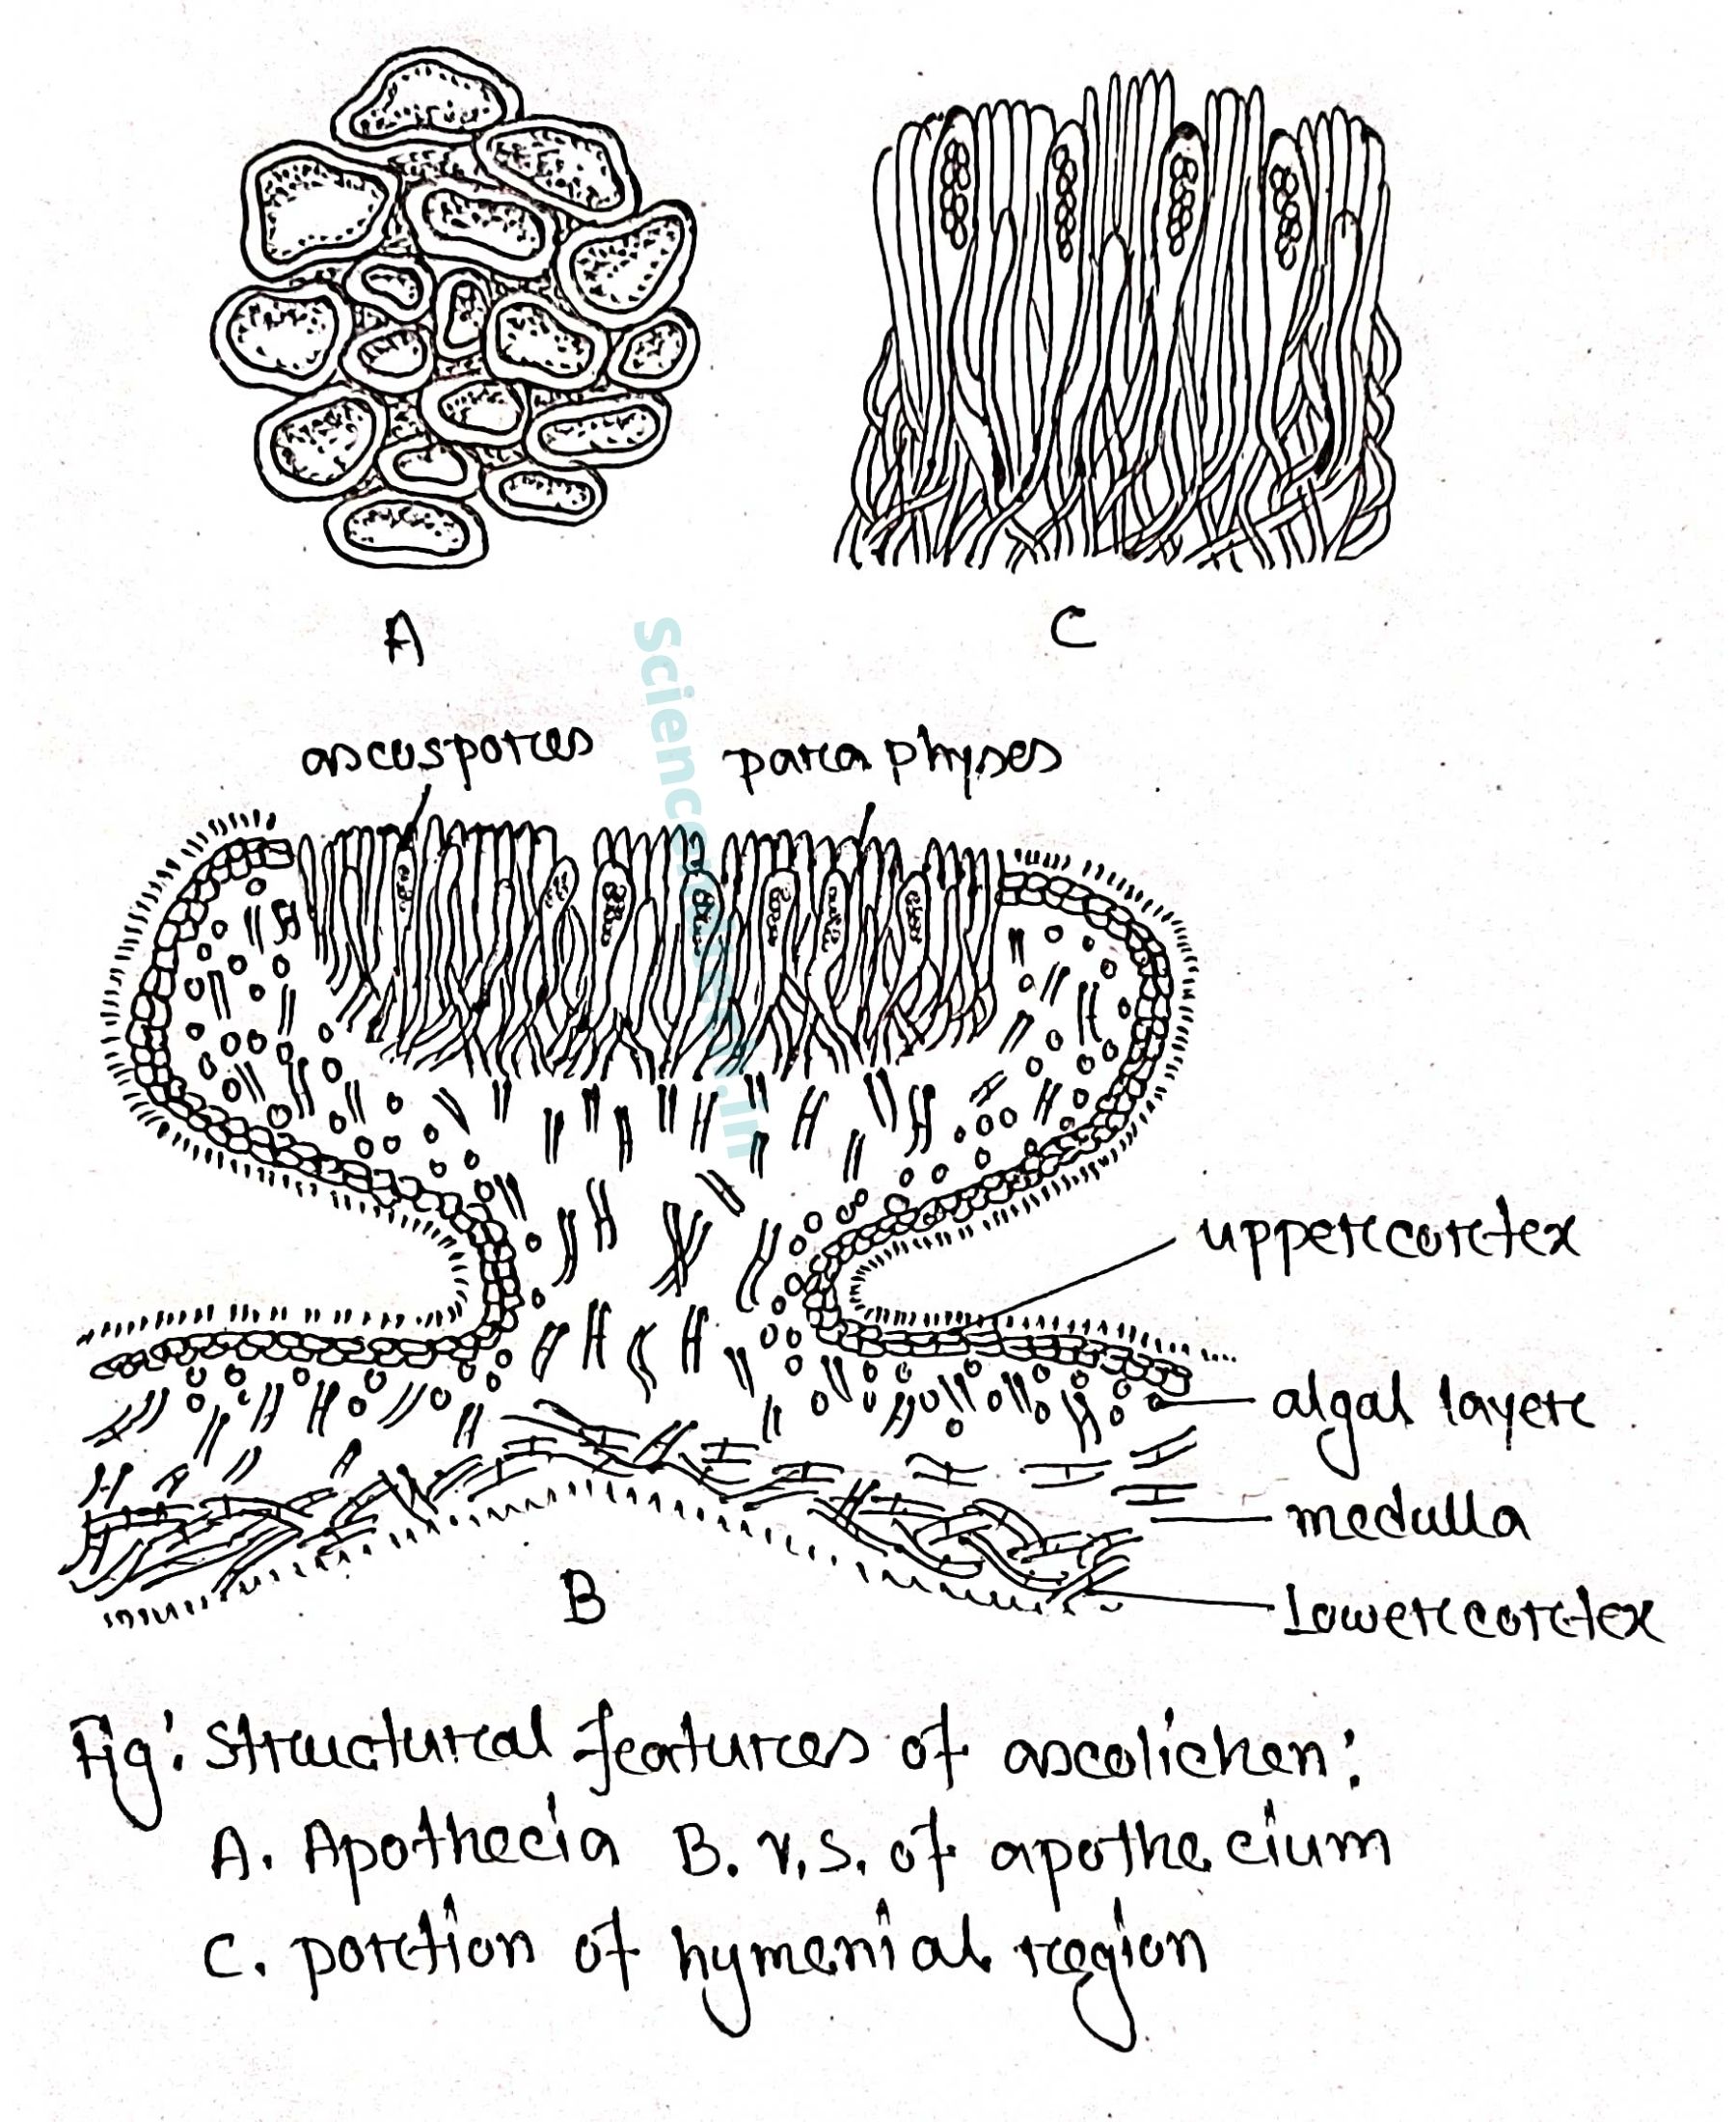 Structure features of ascolichen, Apothecia B.V.S apothecium and Portion of hymenial region